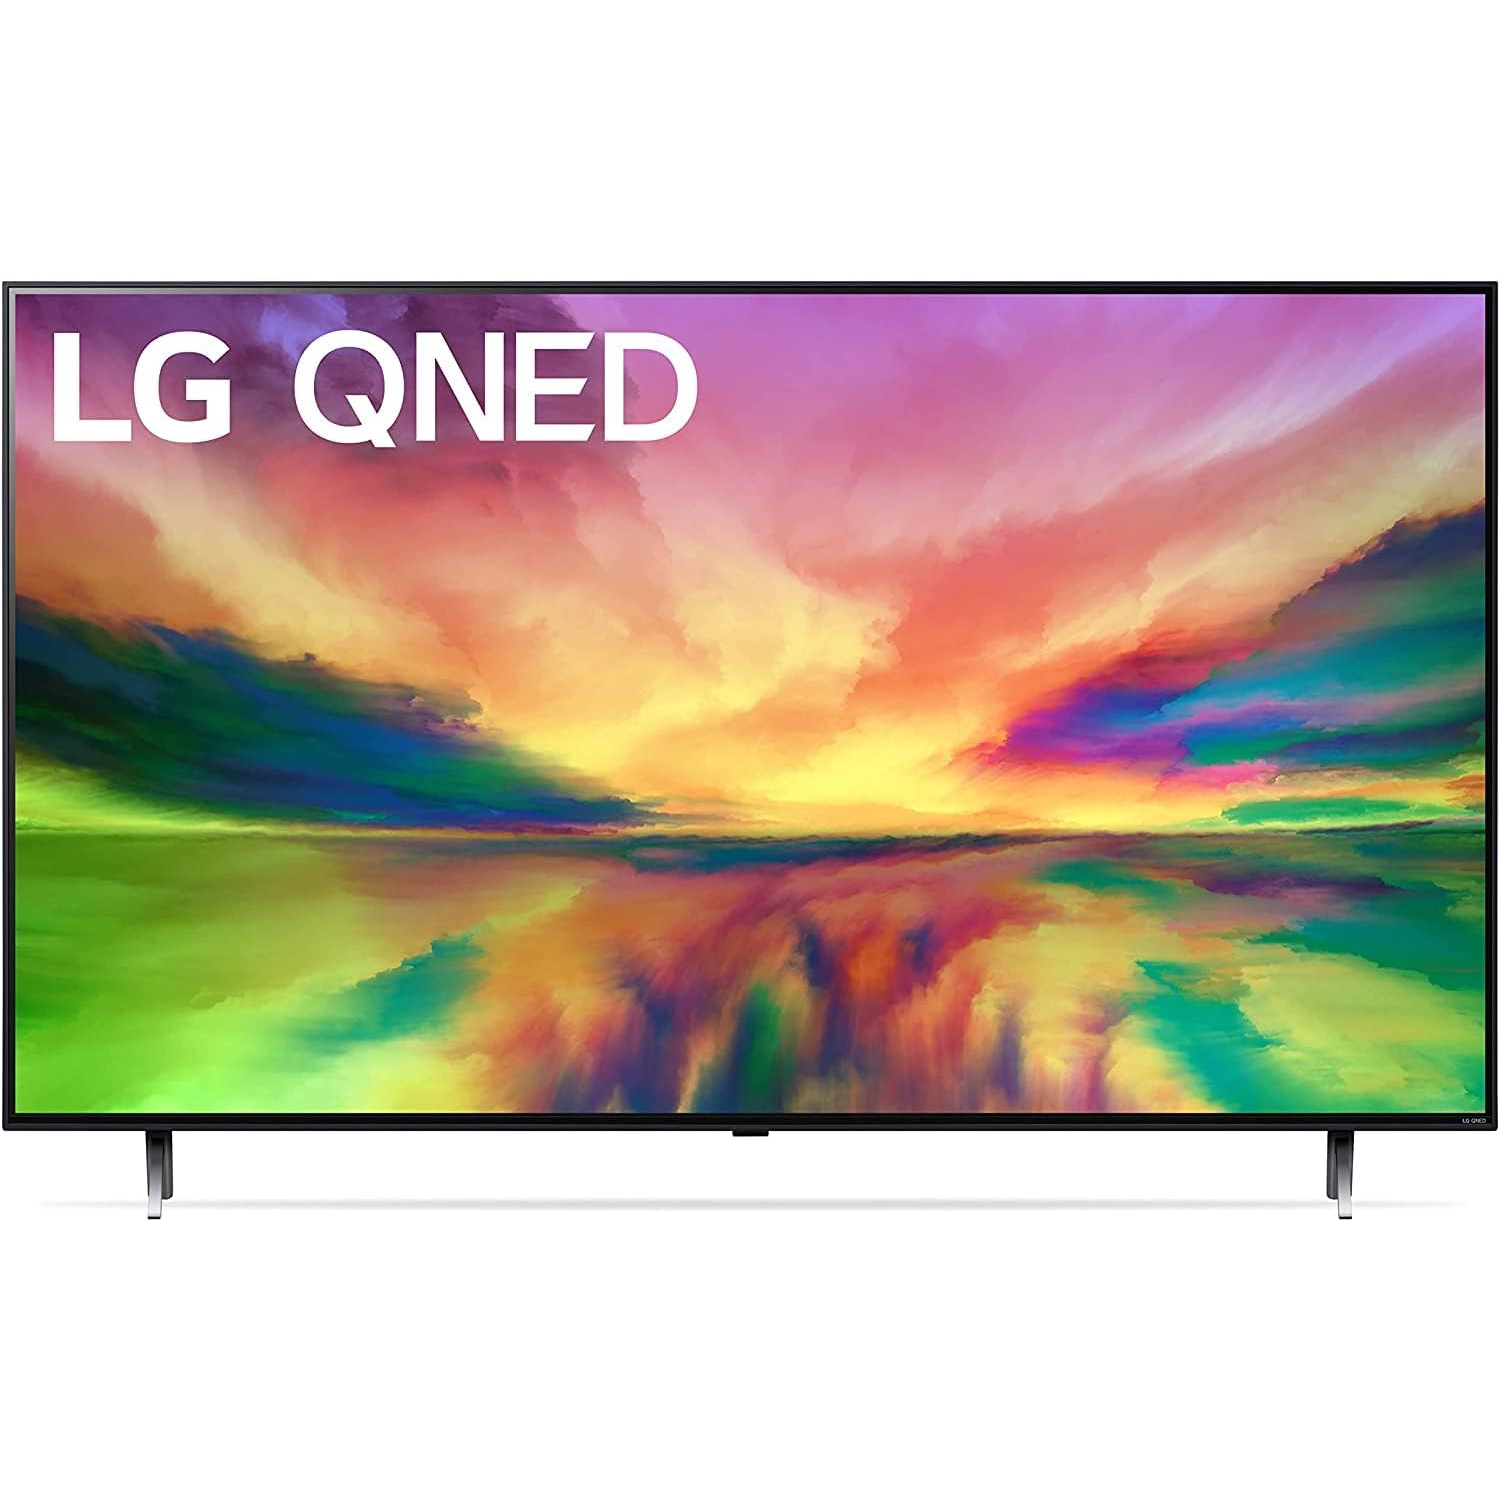 LG QNED80 75-Inch QLED NanoCell 4K Smart TV - Quantum Dot Nanocell, AI-Powered, Alexa Built-in, Gaming, 120Hz Refresh (75QNED80URA)-Open Box (10/10 Condition)